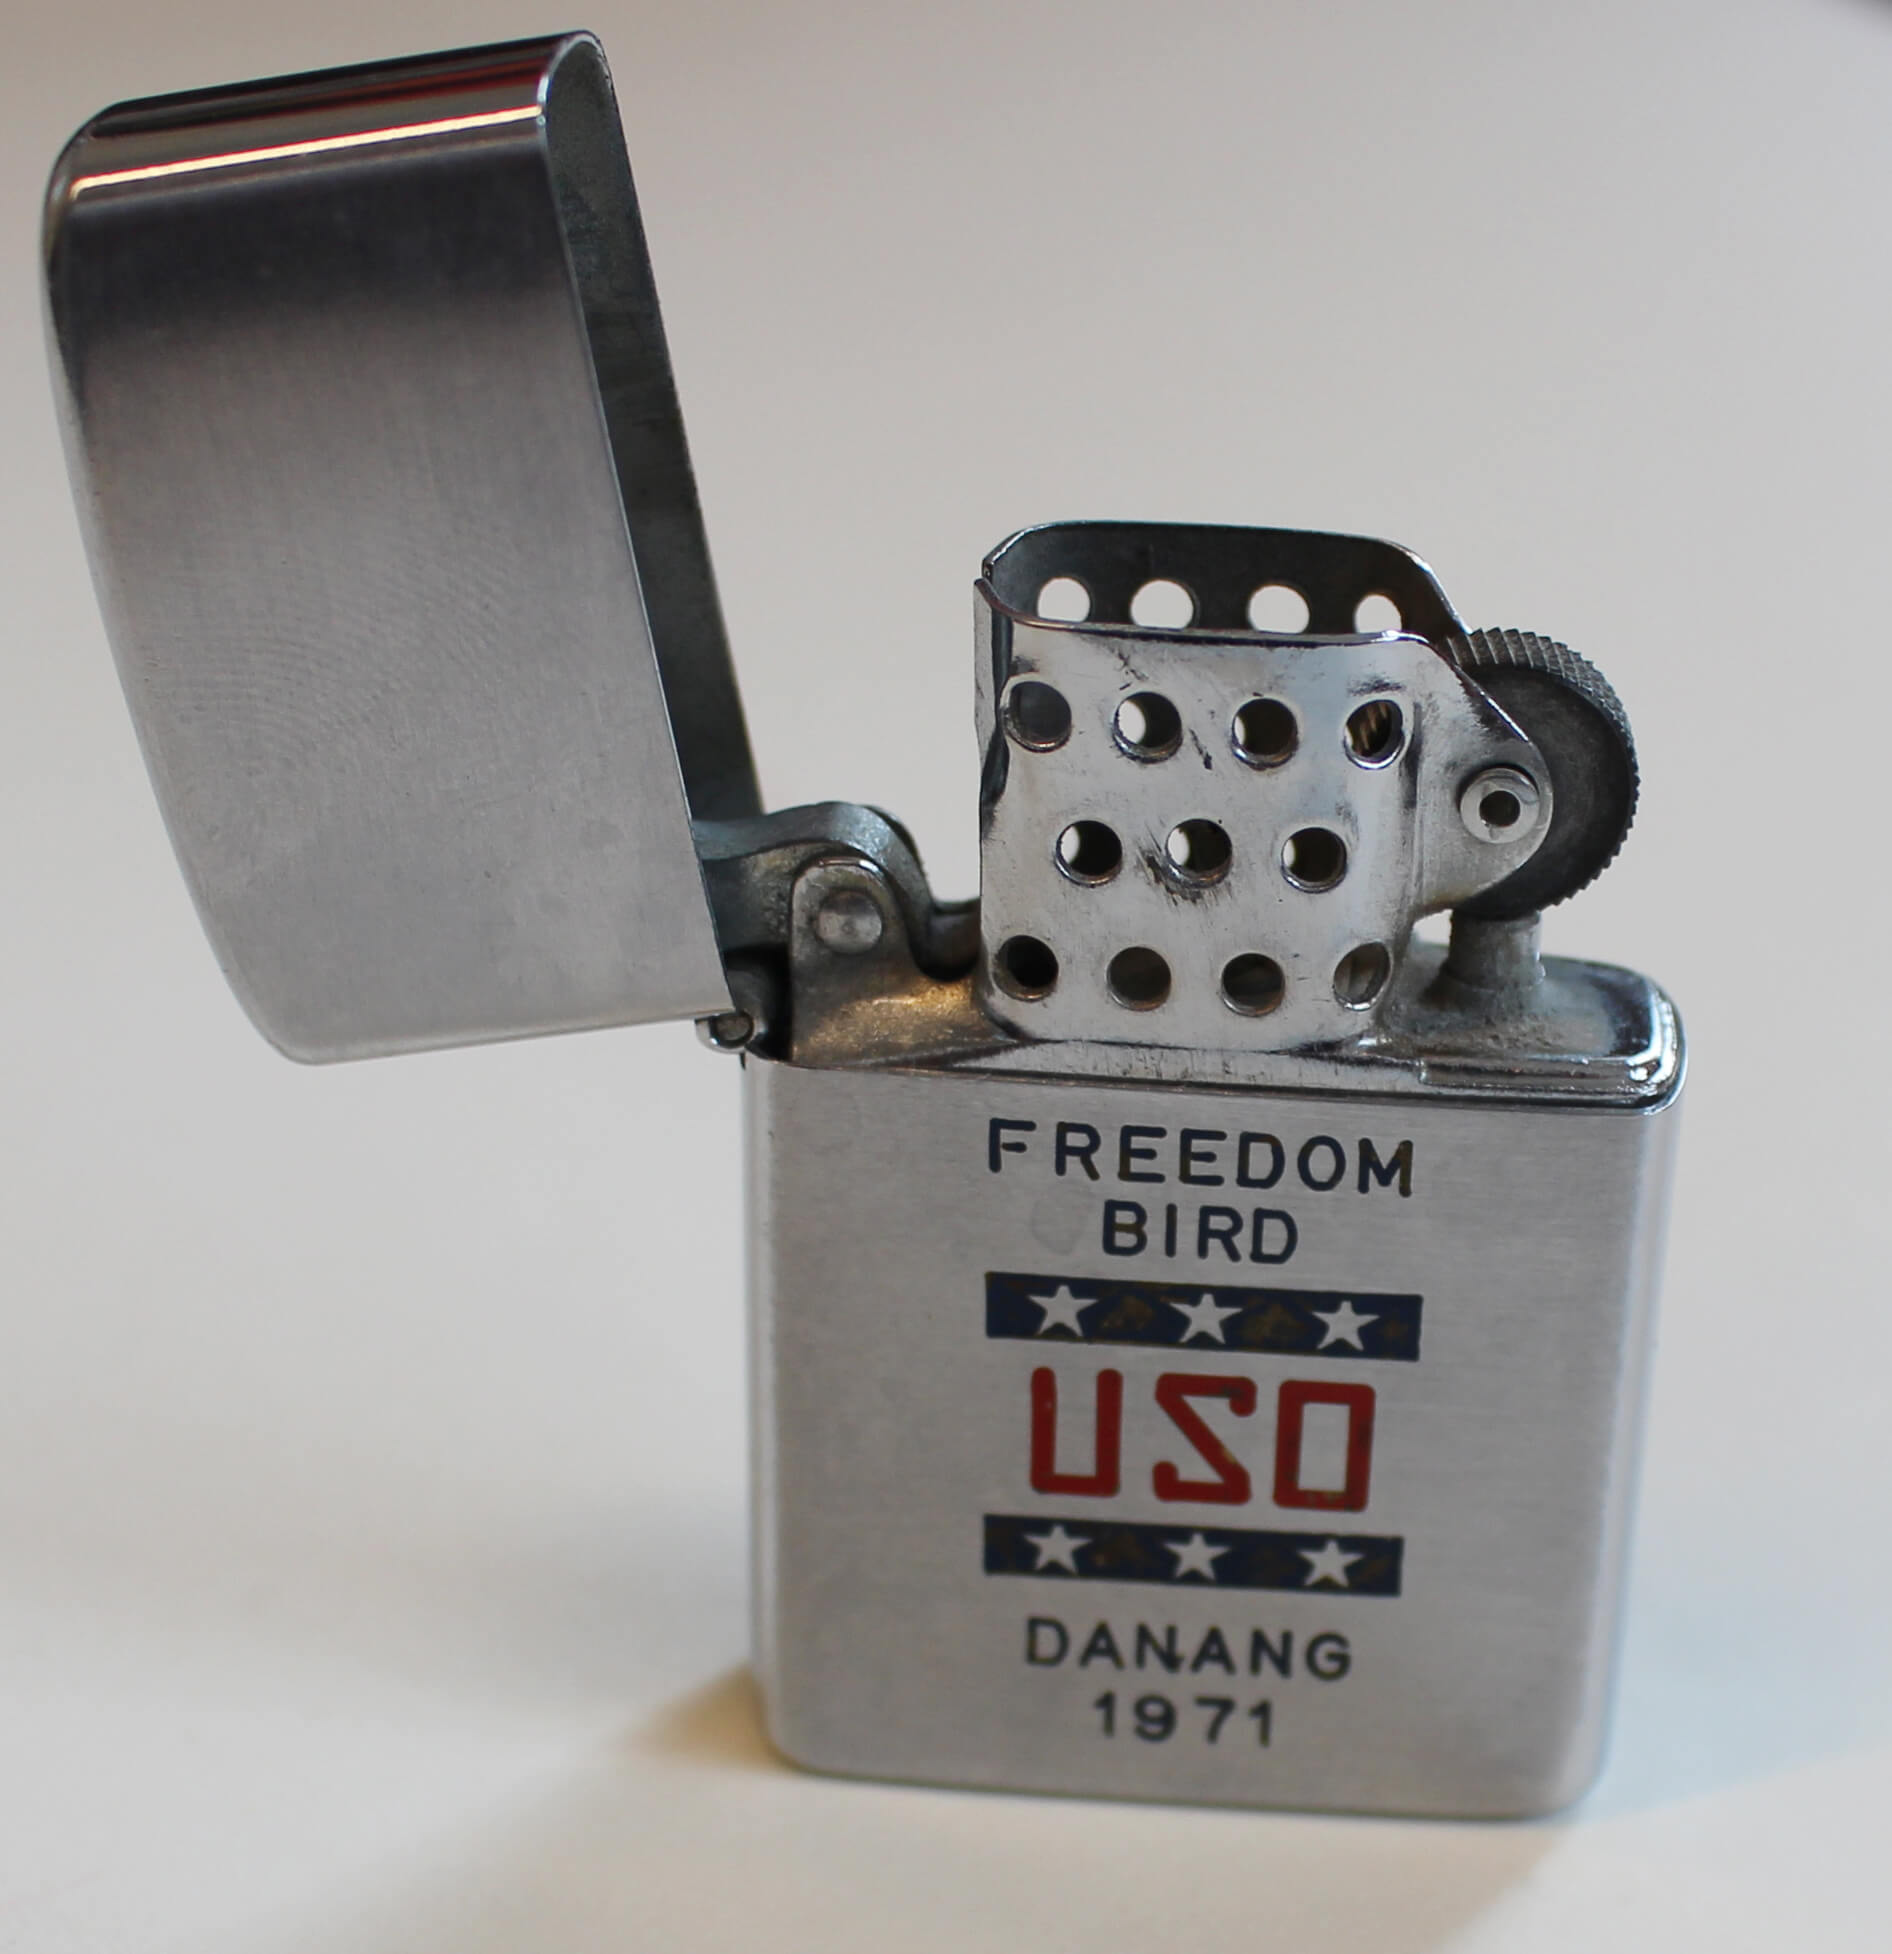 Lighter with text Freedom Bird USO, Danang 1971